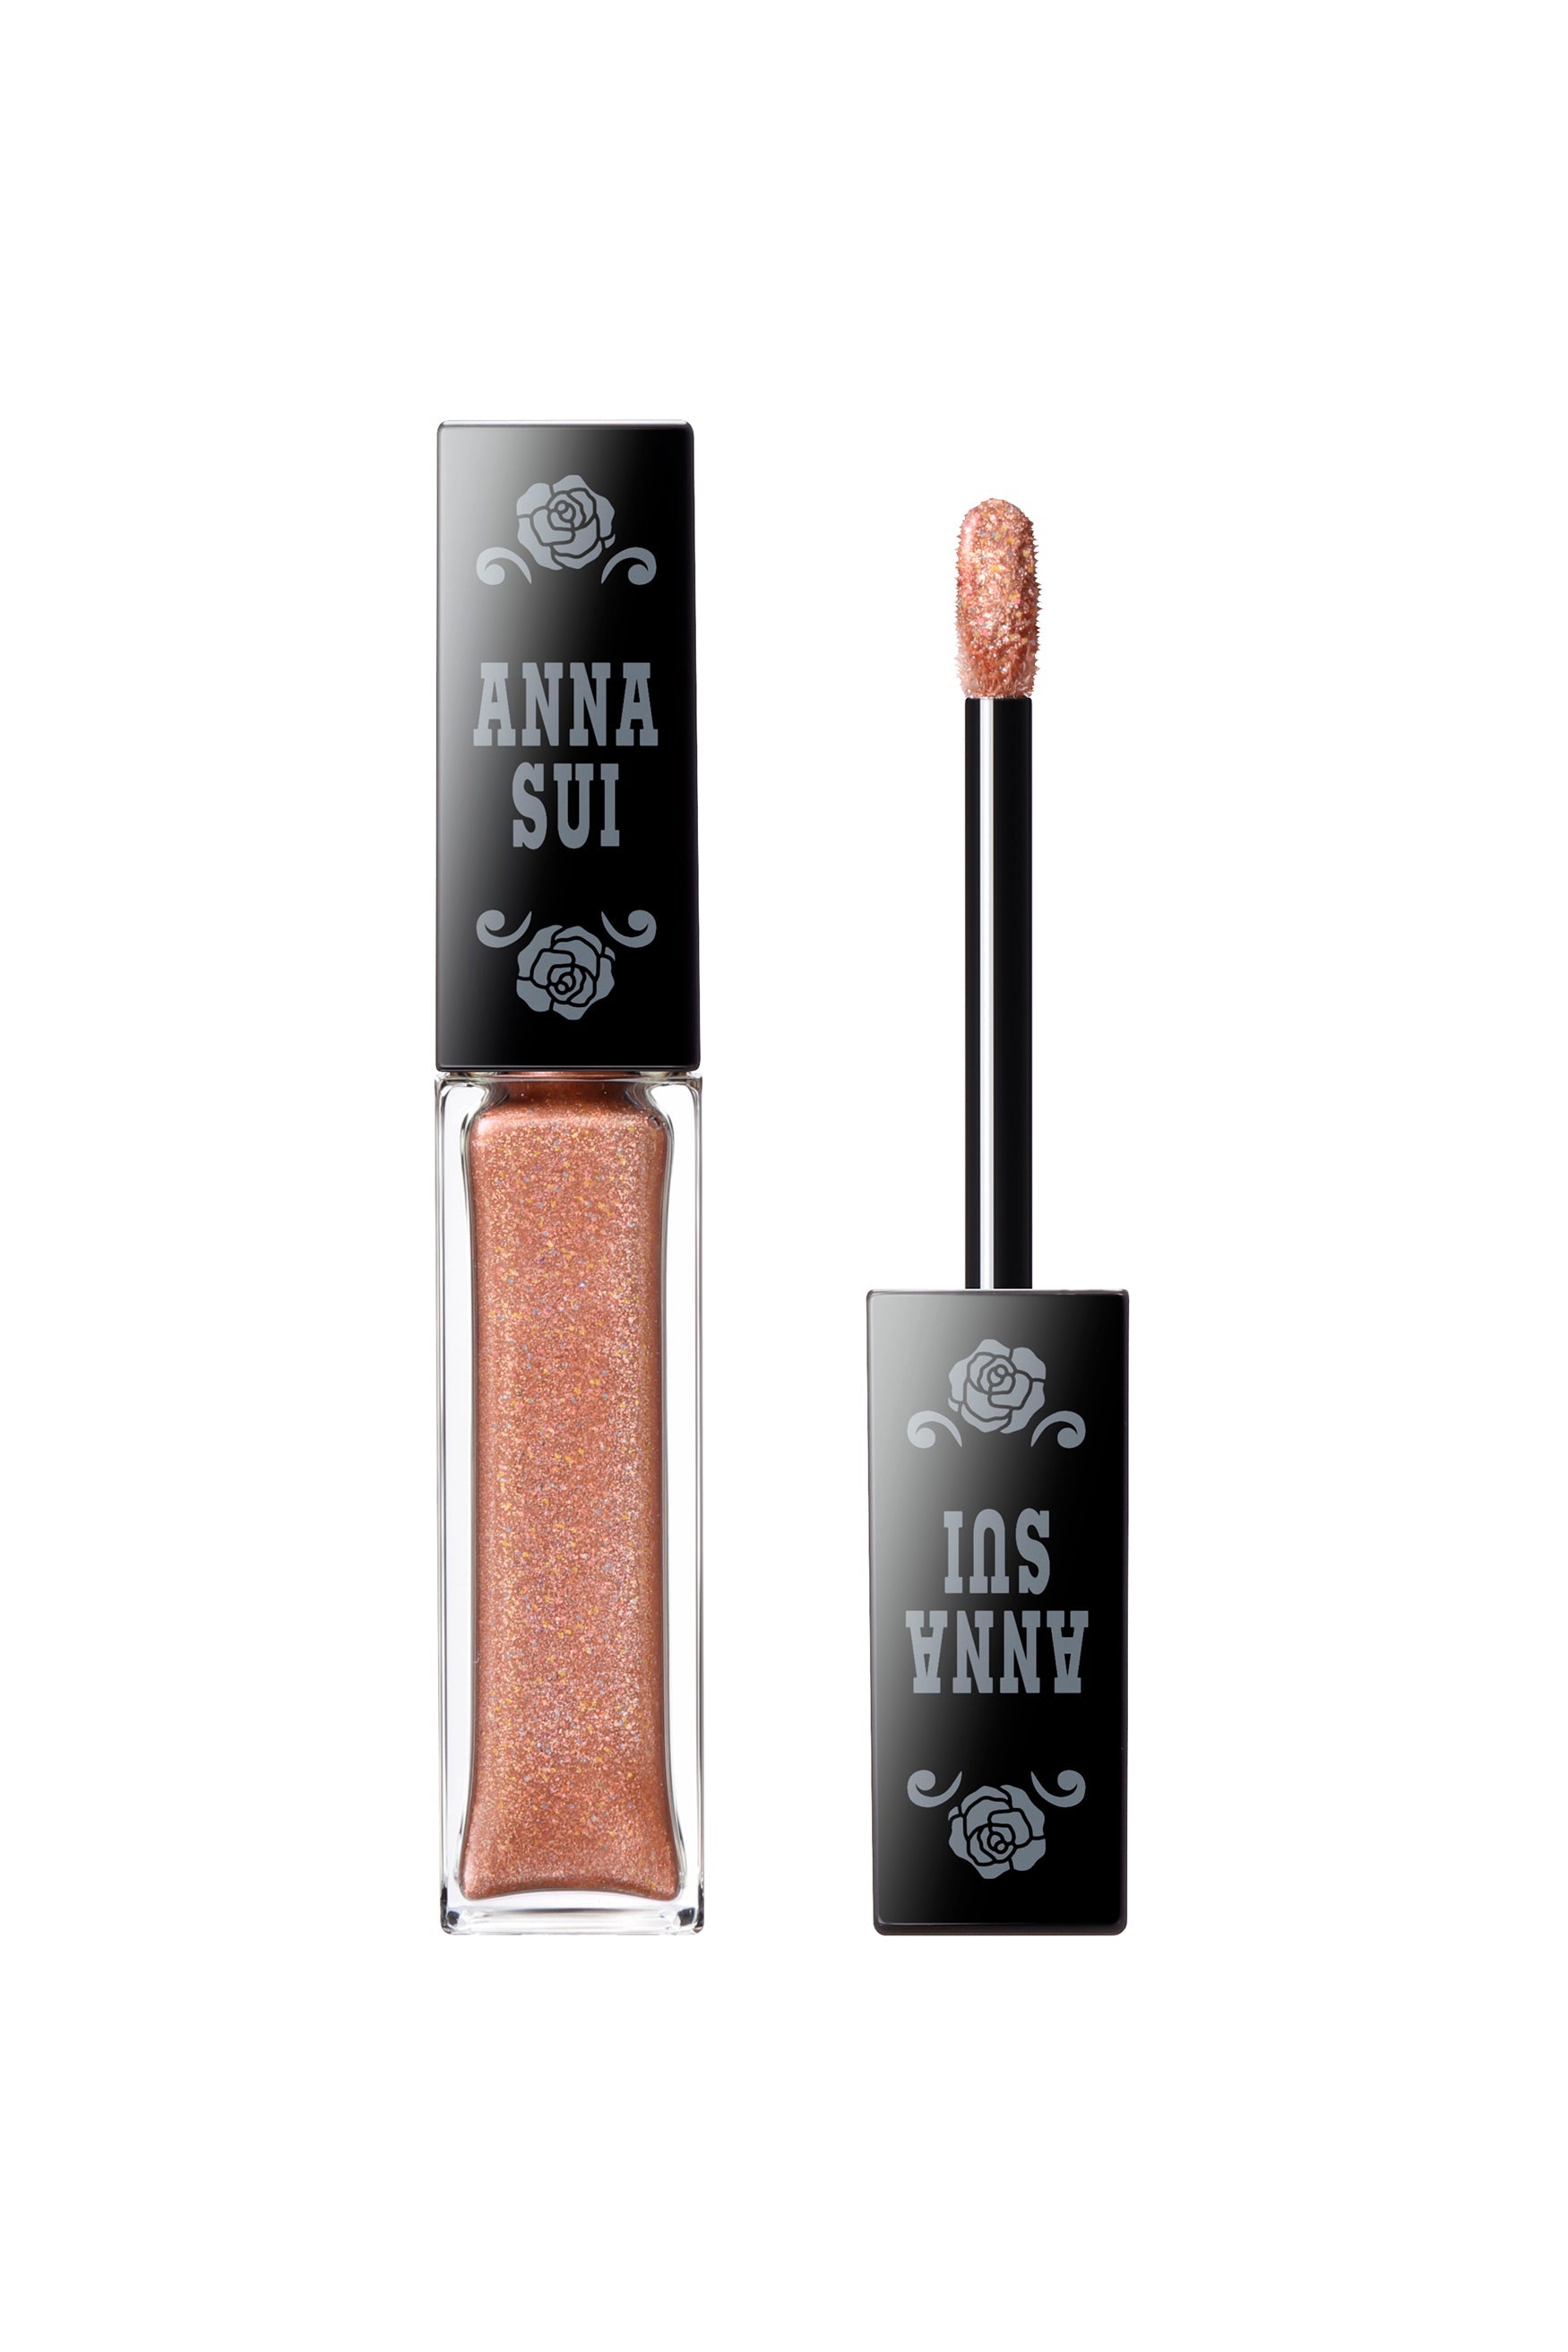 HONEY GLOW is formulated to maximize the quality of the glitter for instant luminance upon application